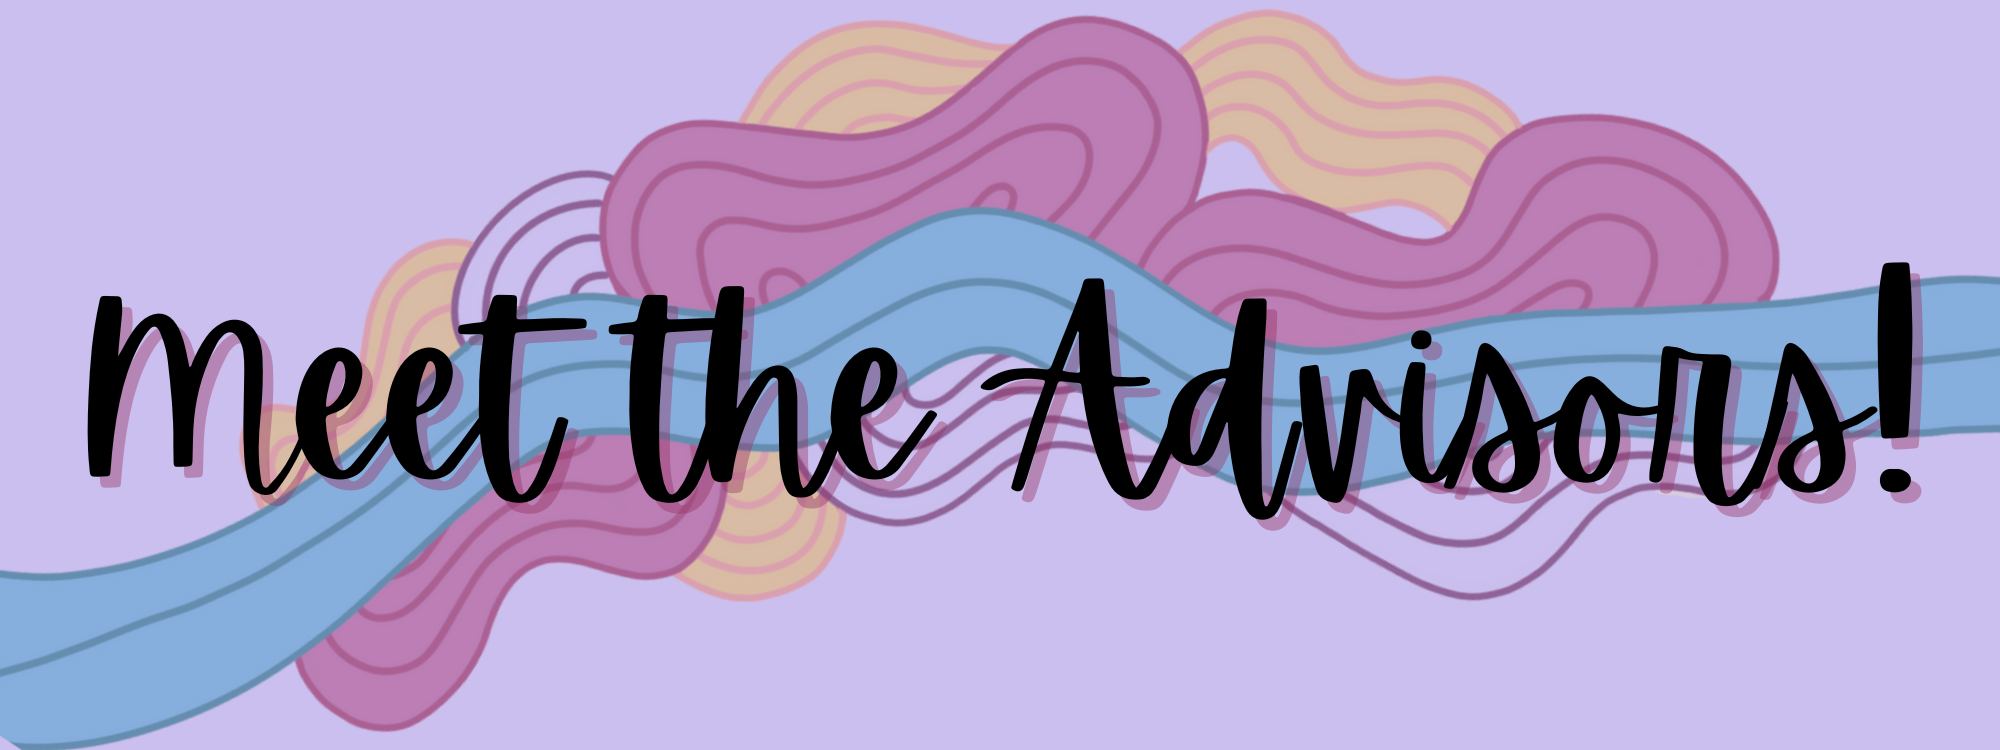 A purple background with Meet the Advisor! across the front in an artsy text